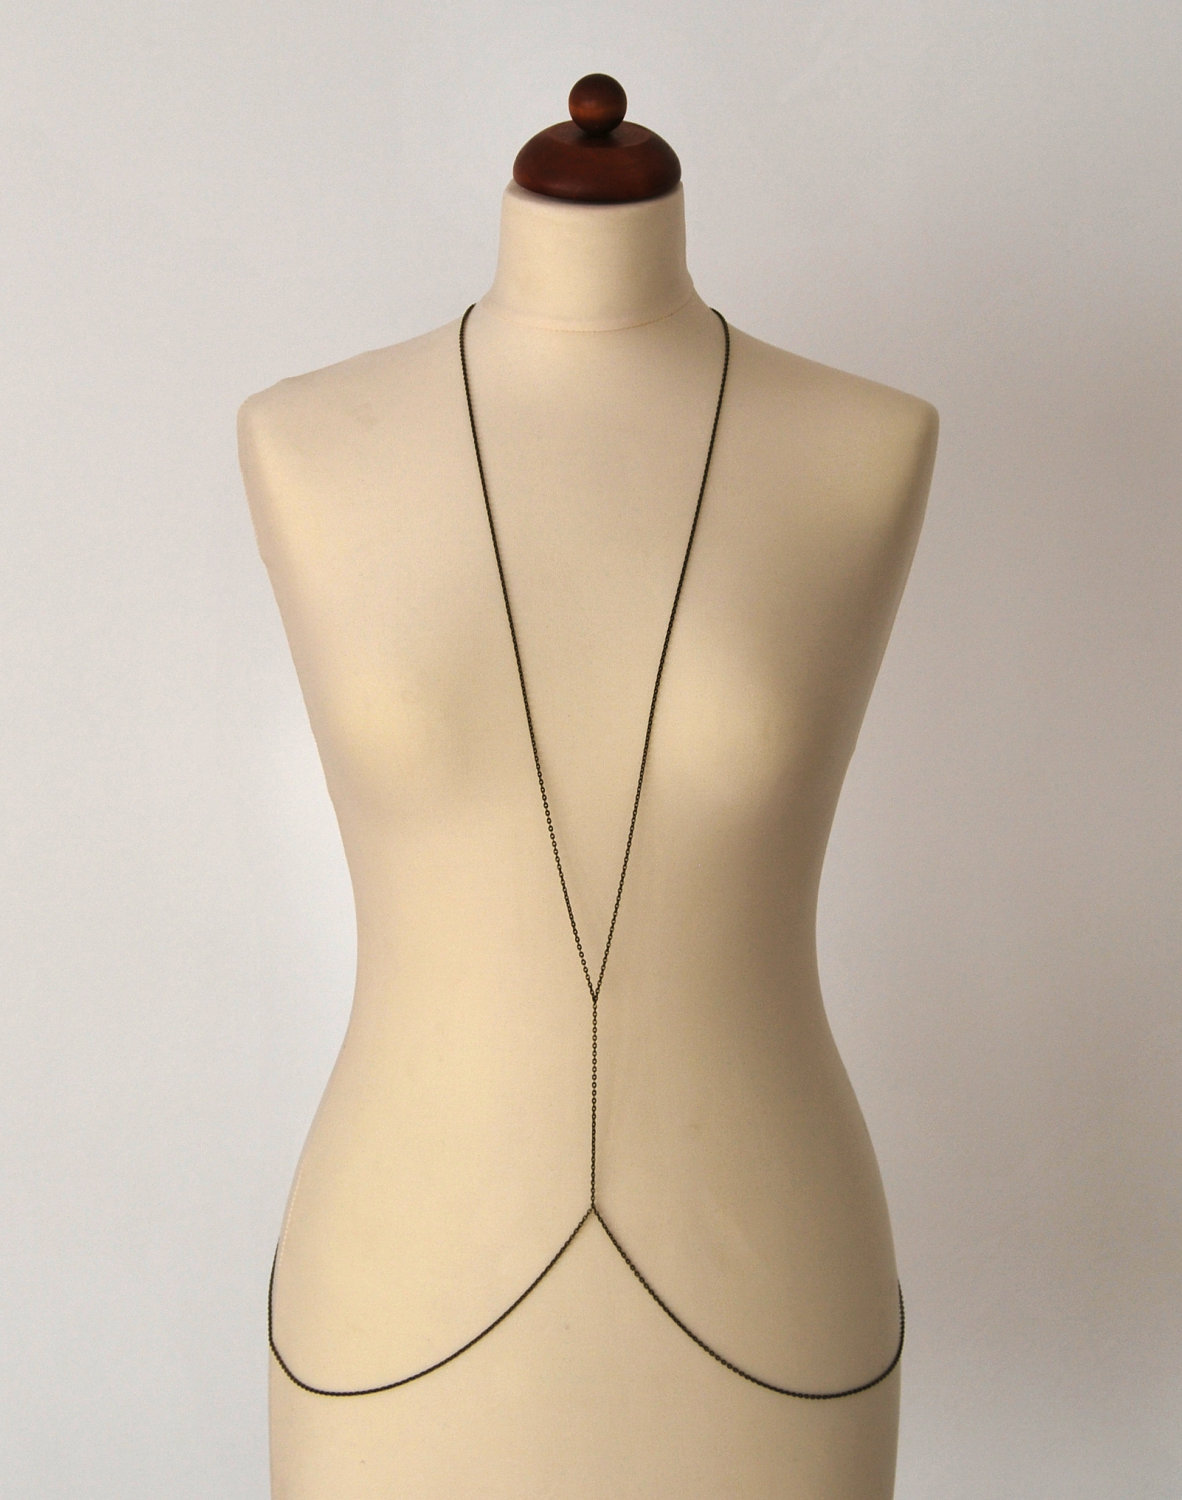 Simple Body Chain No. 2 by hungry Swan